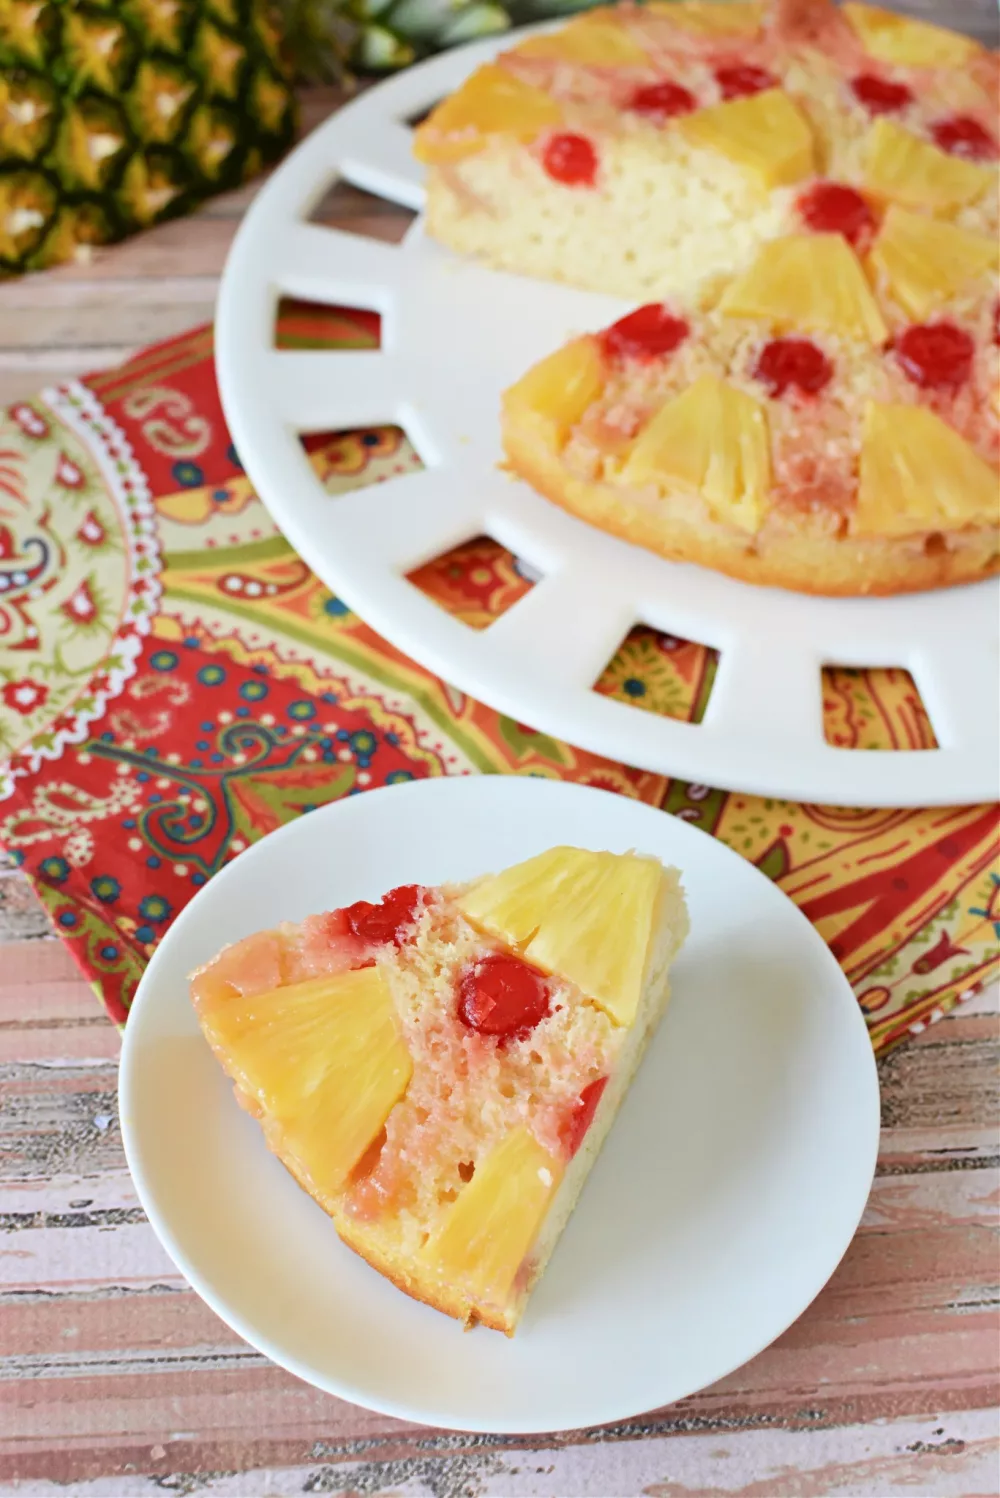 cake covered in pineapple and cherries